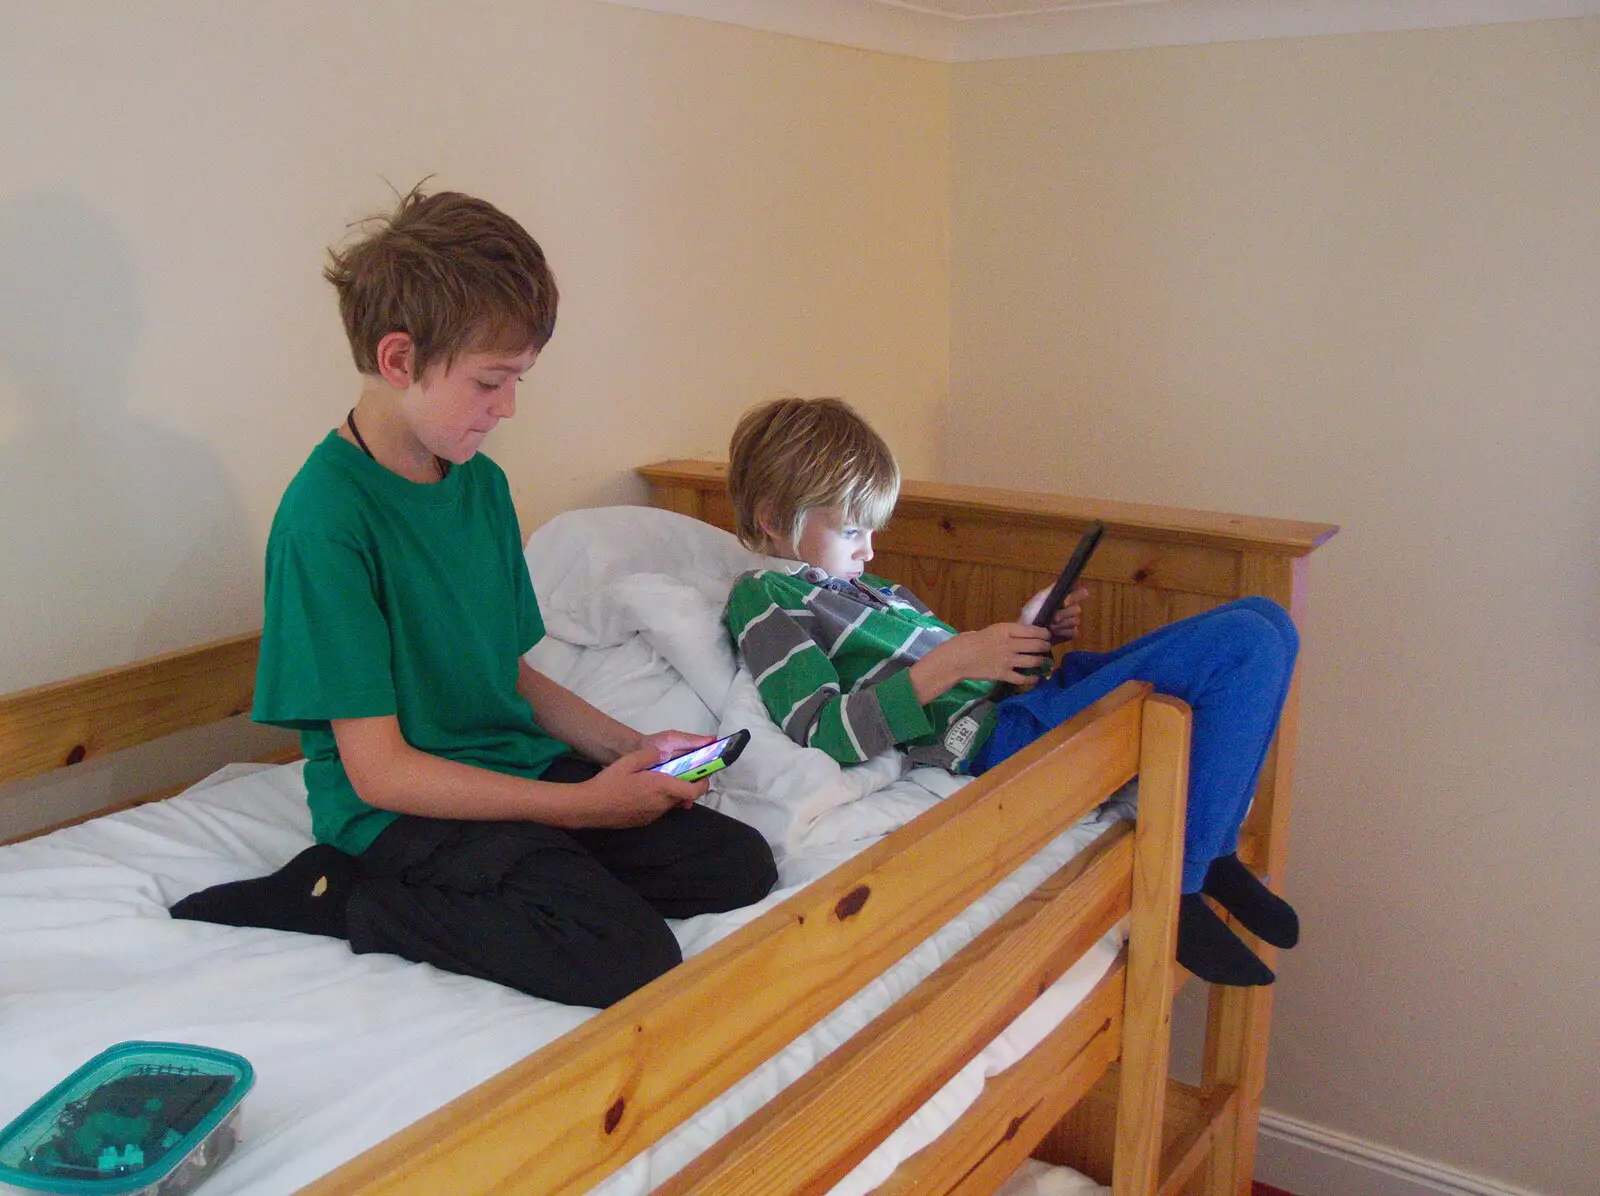 The boys are on devices again, from The Summer Trip to Ireland, Monkstown, Co. Dublin, Ireland - 9th August 2019